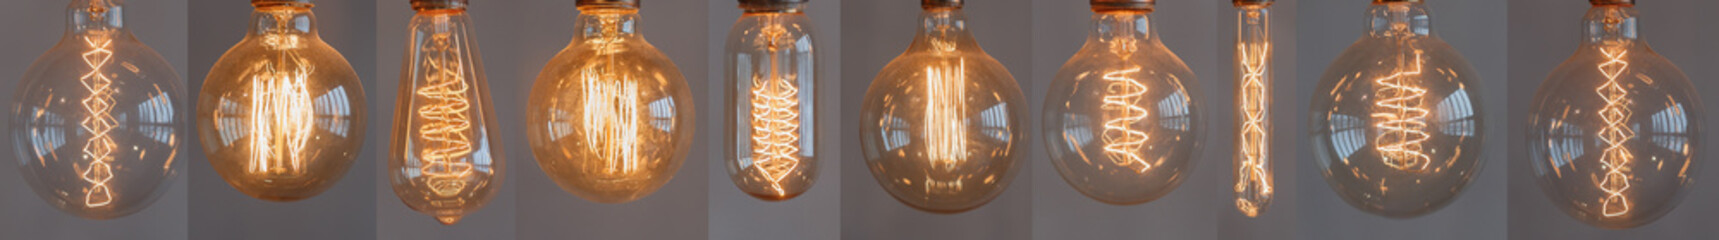 Set edison retro lamp on gray background of different shapes